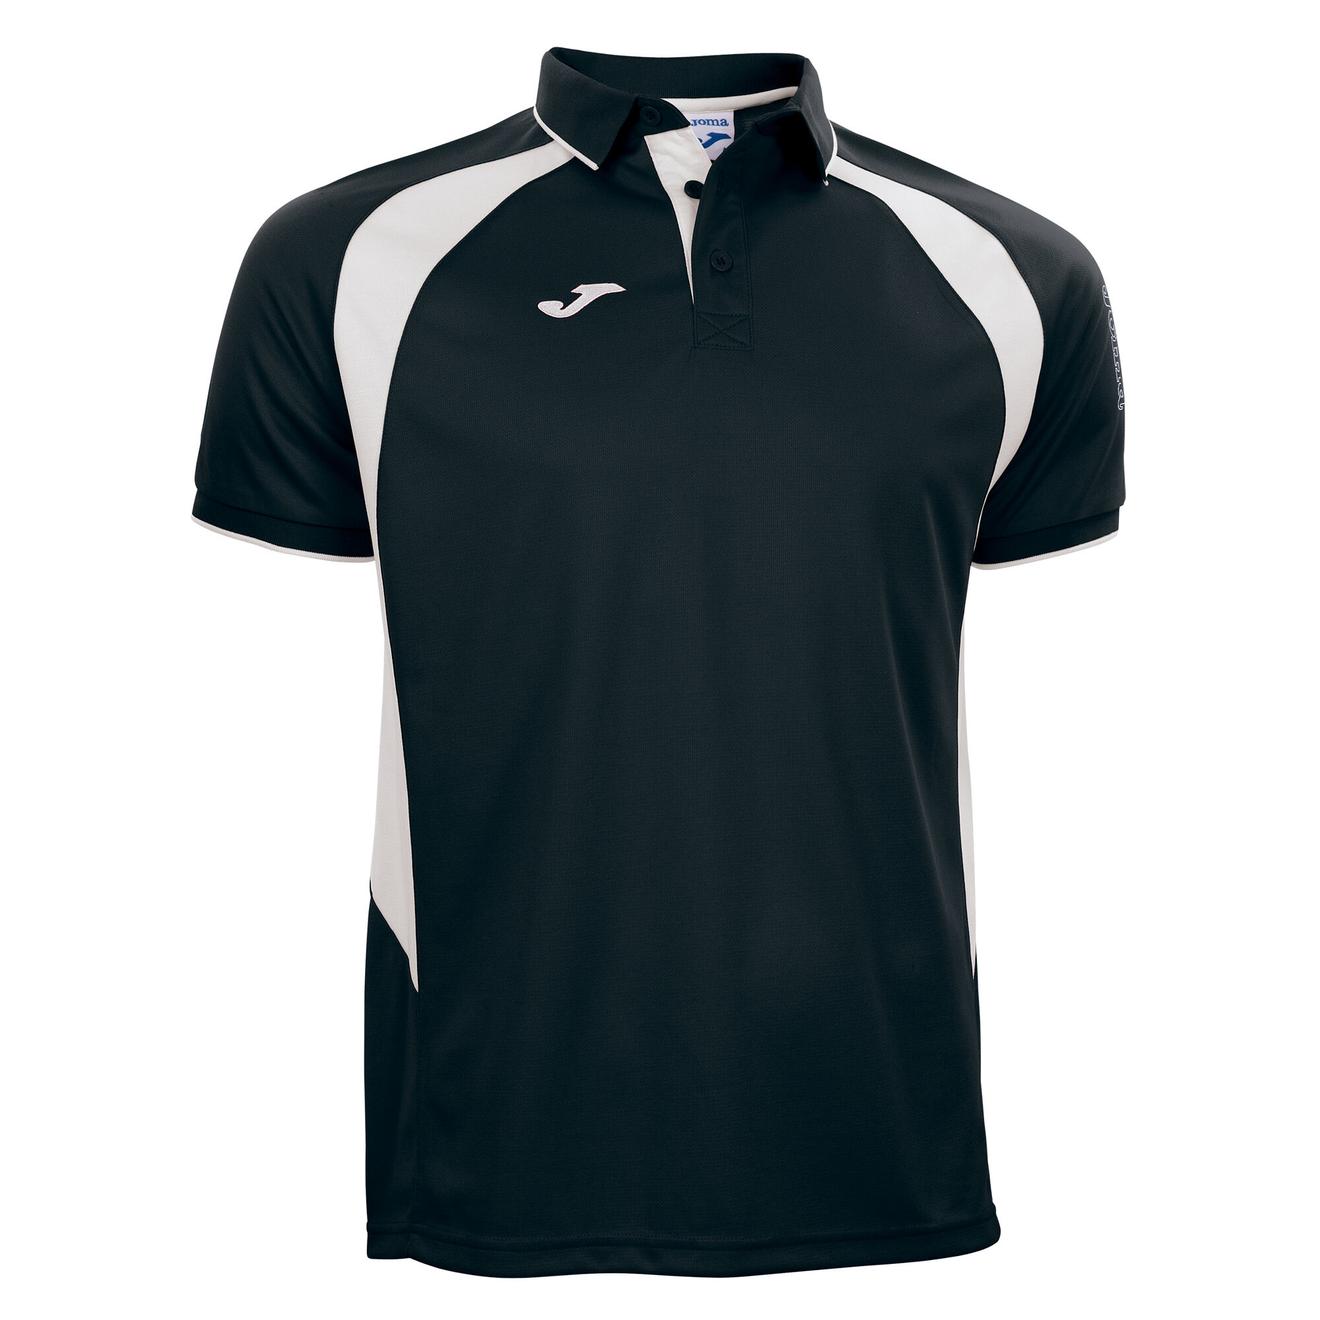 Polo shirt short-sleeve man Championship III black white offers at £10.5 in Joma